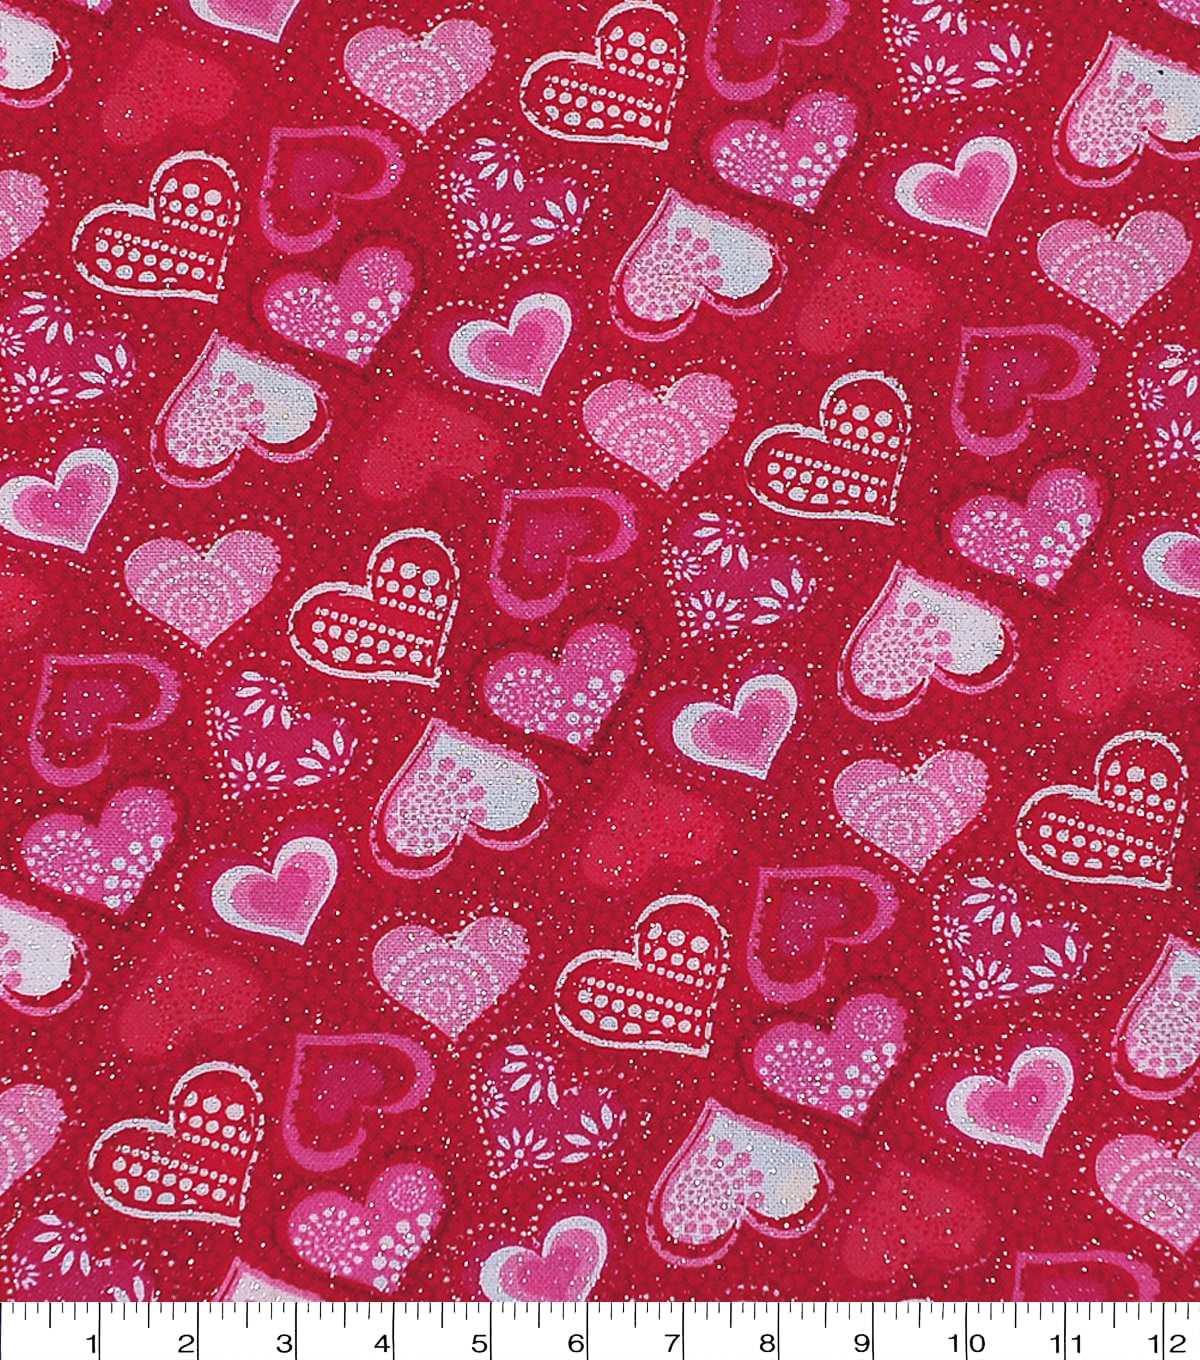 Patterned Hearts Red Glitter Valentine's Day Cotton Fabric | JOANN